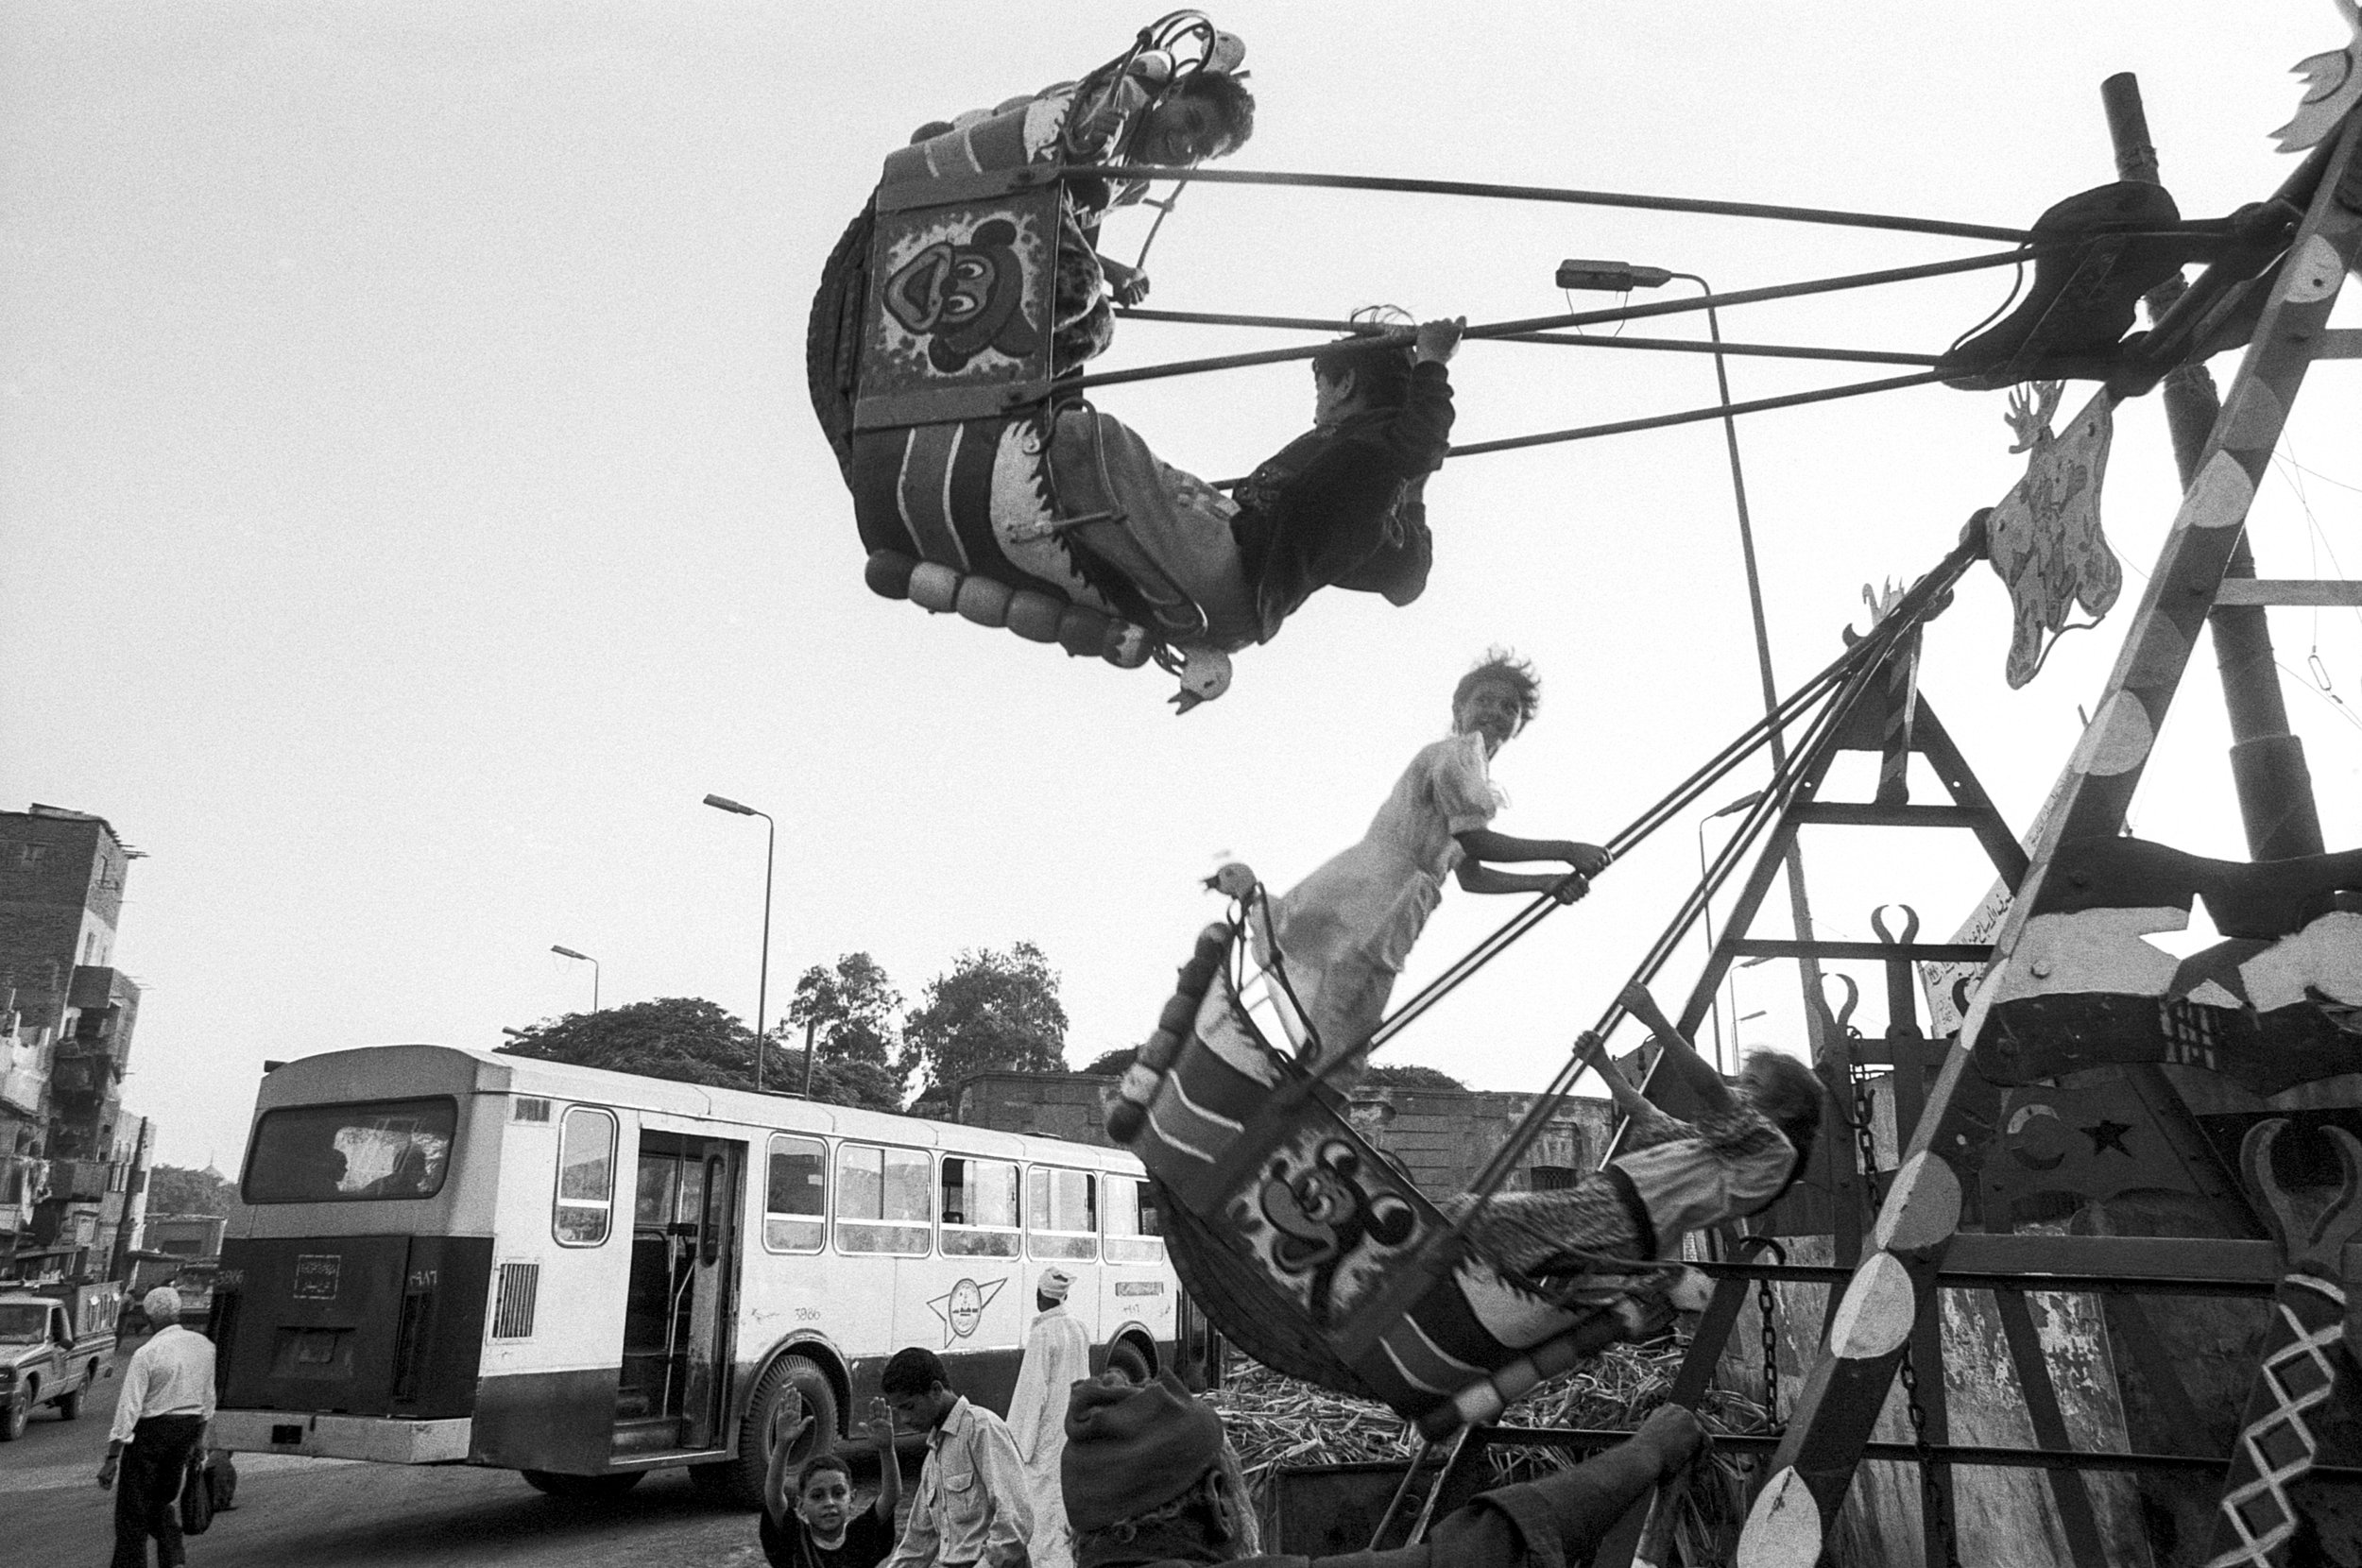  Kids play on an amusement park ride in the City of the Dead. 